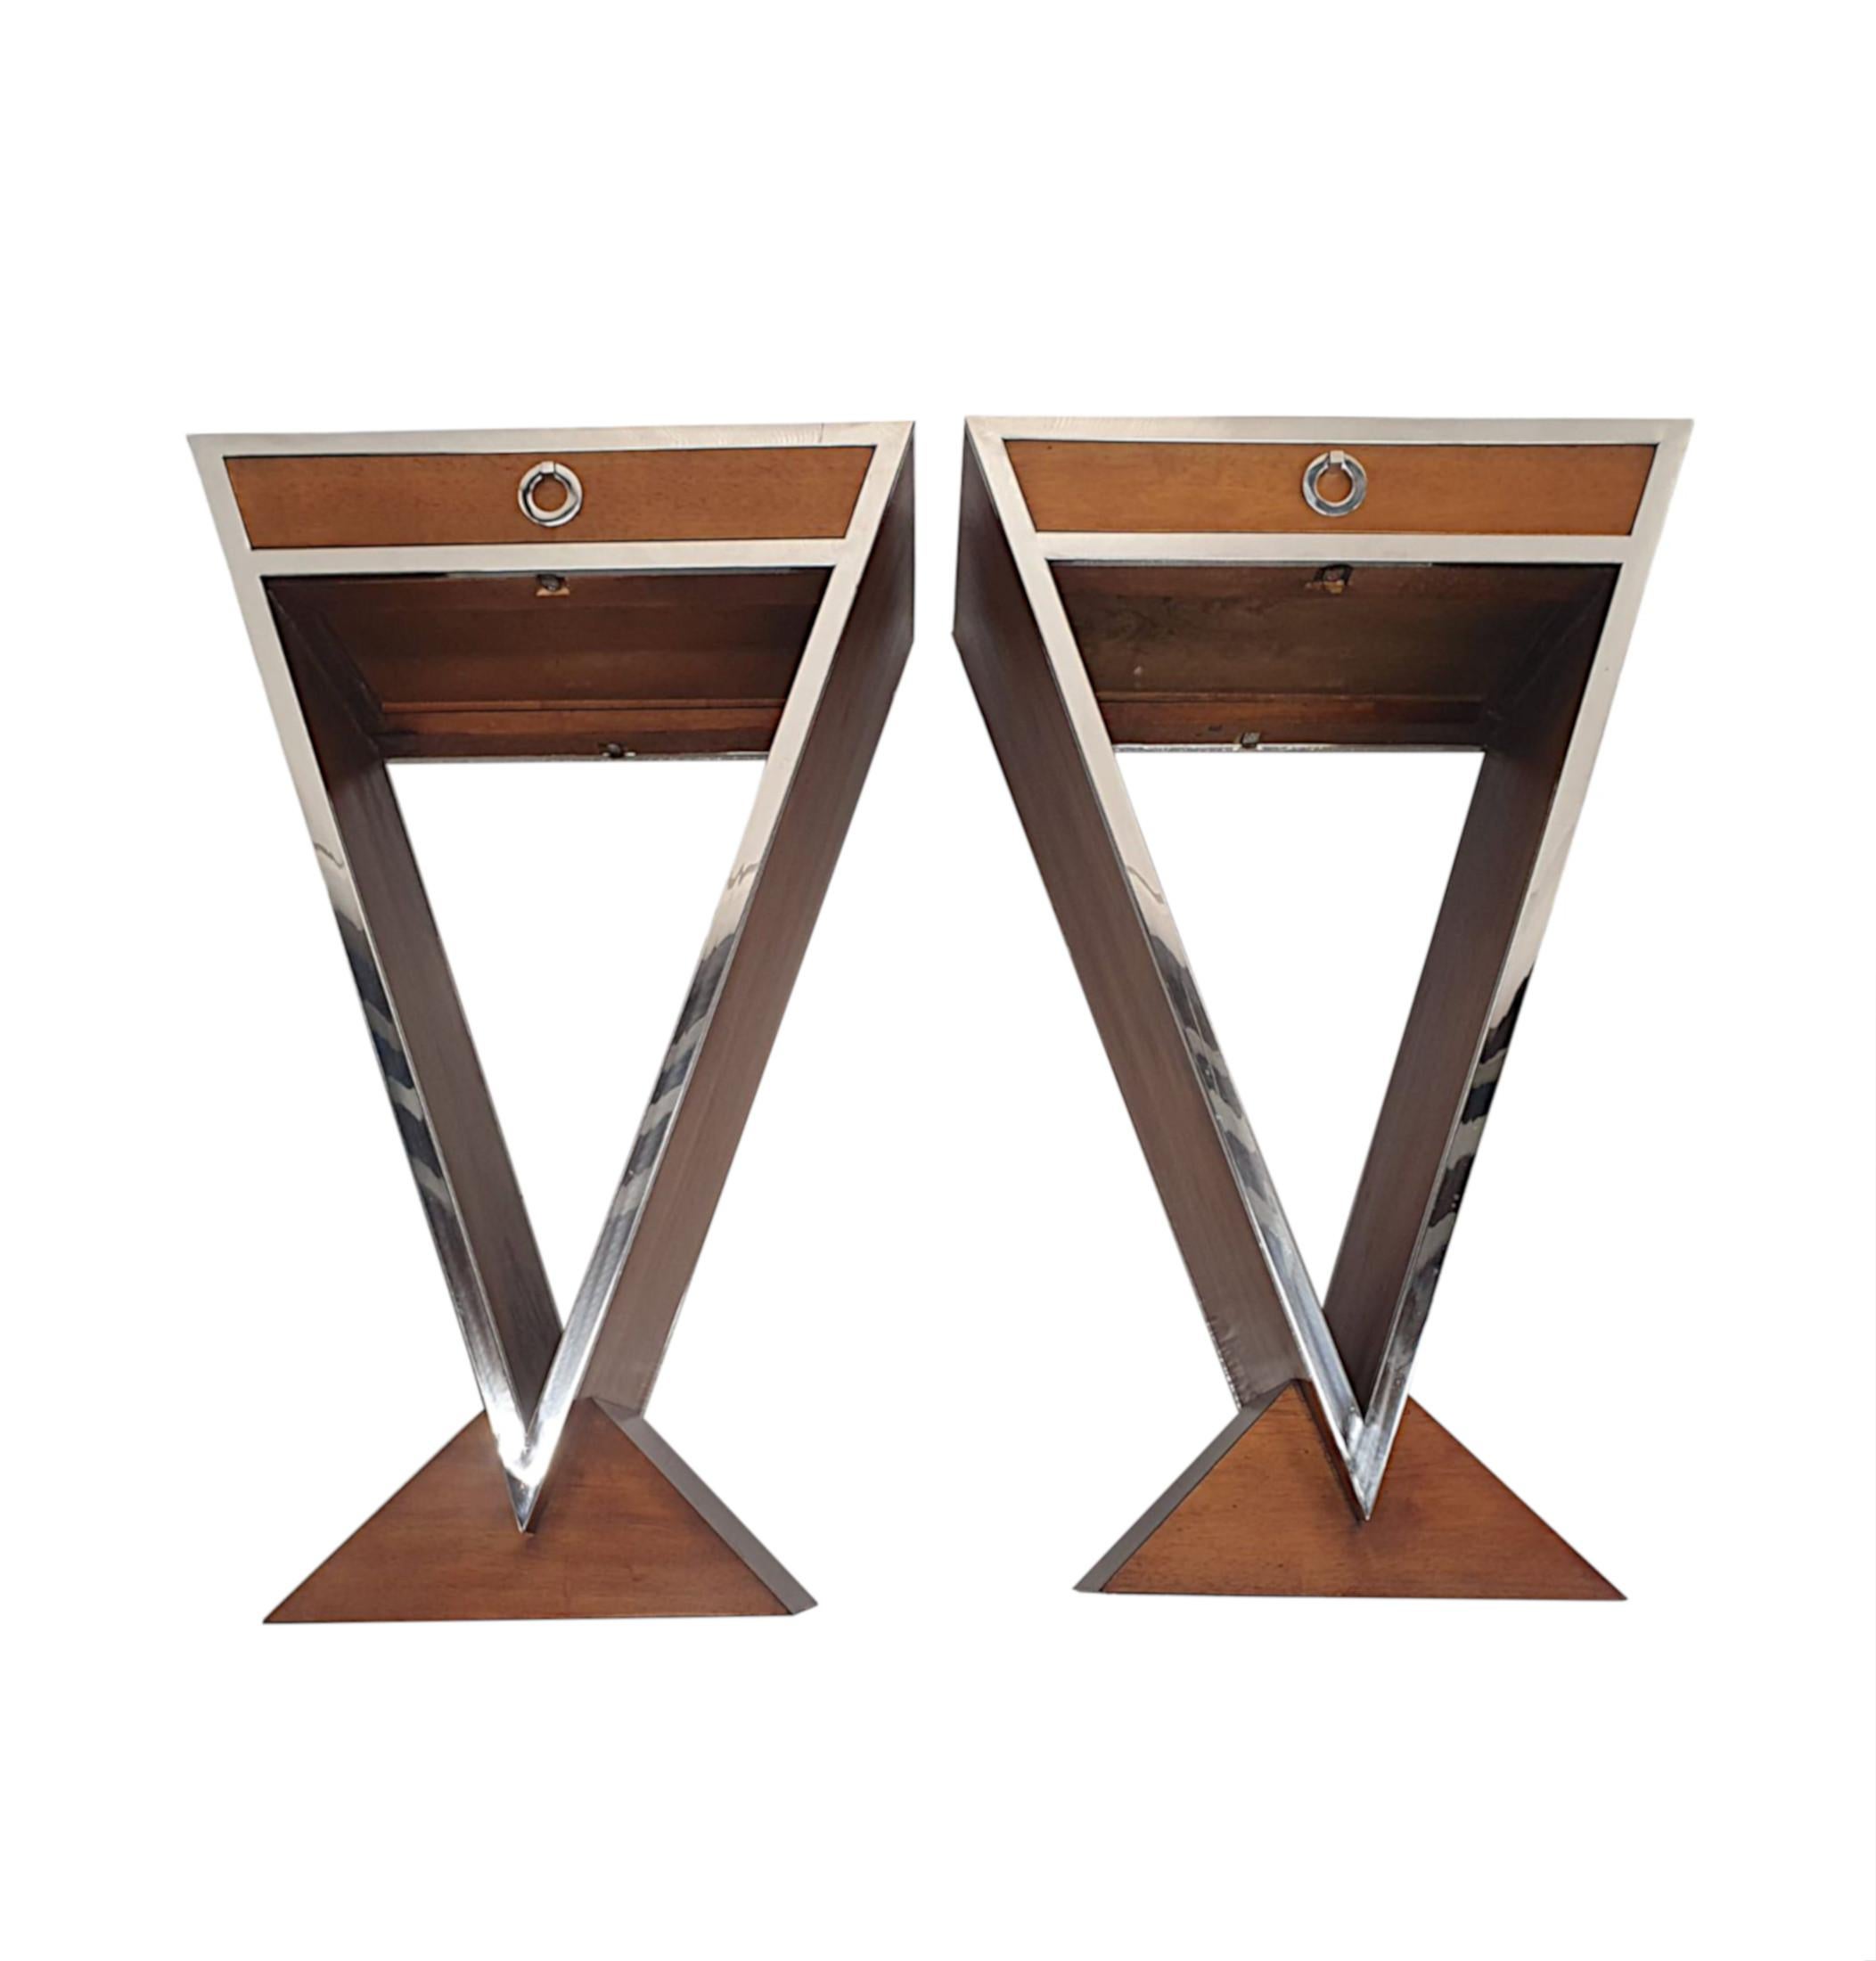  A Stunning Pair of Cherrywood and Chrome Side Tables in the Art Deco Style In New Condition For Sale In Dublin, IE